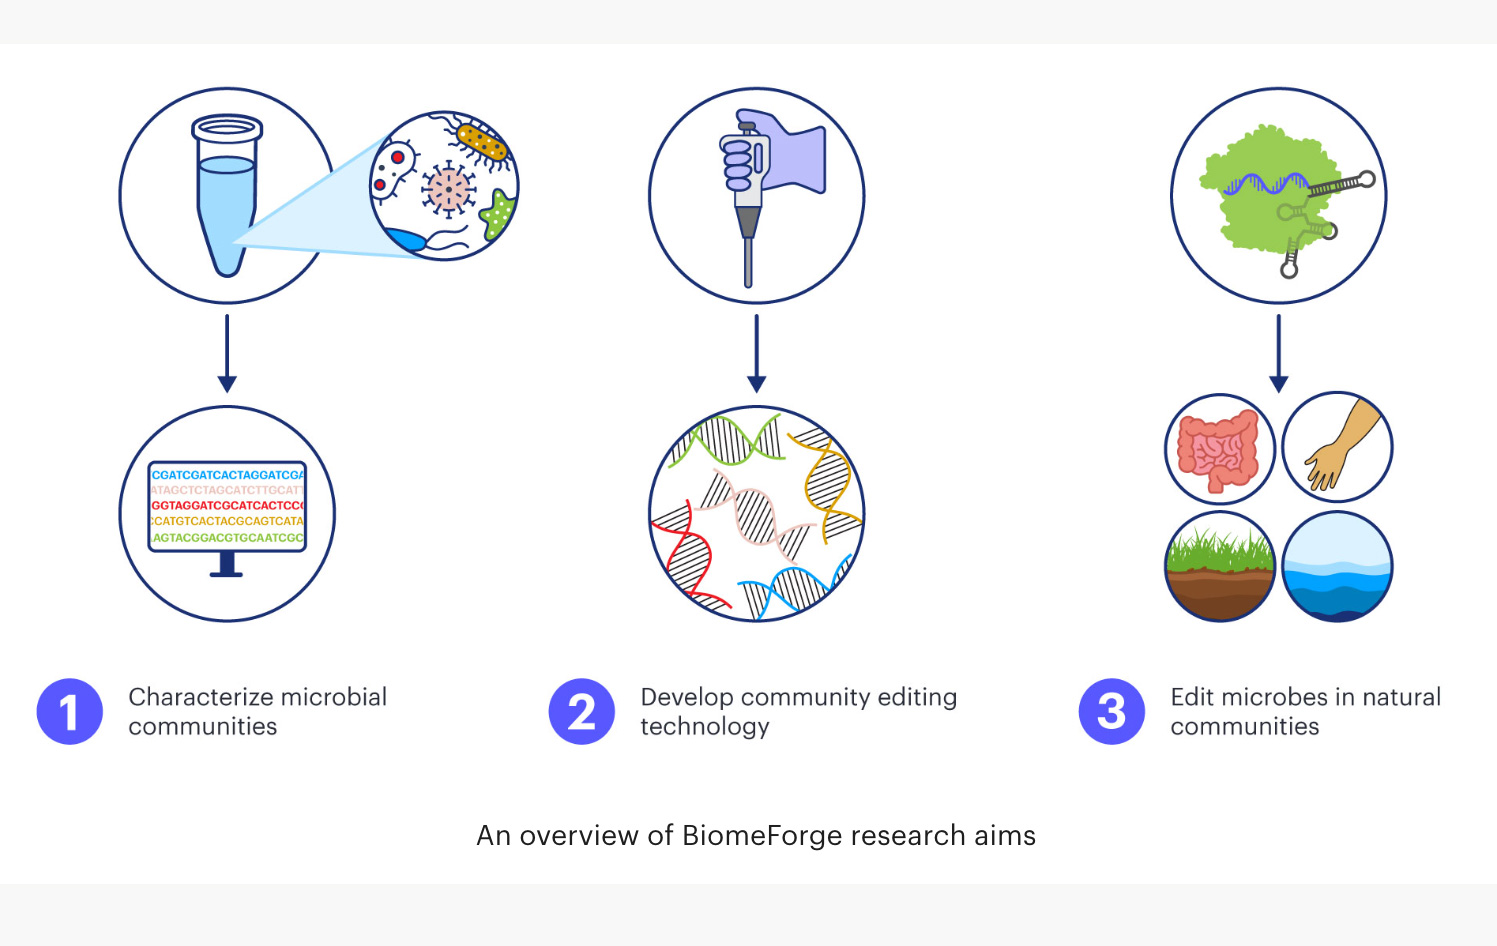 Diagram of "An overview of BiomeForge research aims"–1. characterize microbial communities. 2. develop community editing technology. 3. edit microbes in natural communities